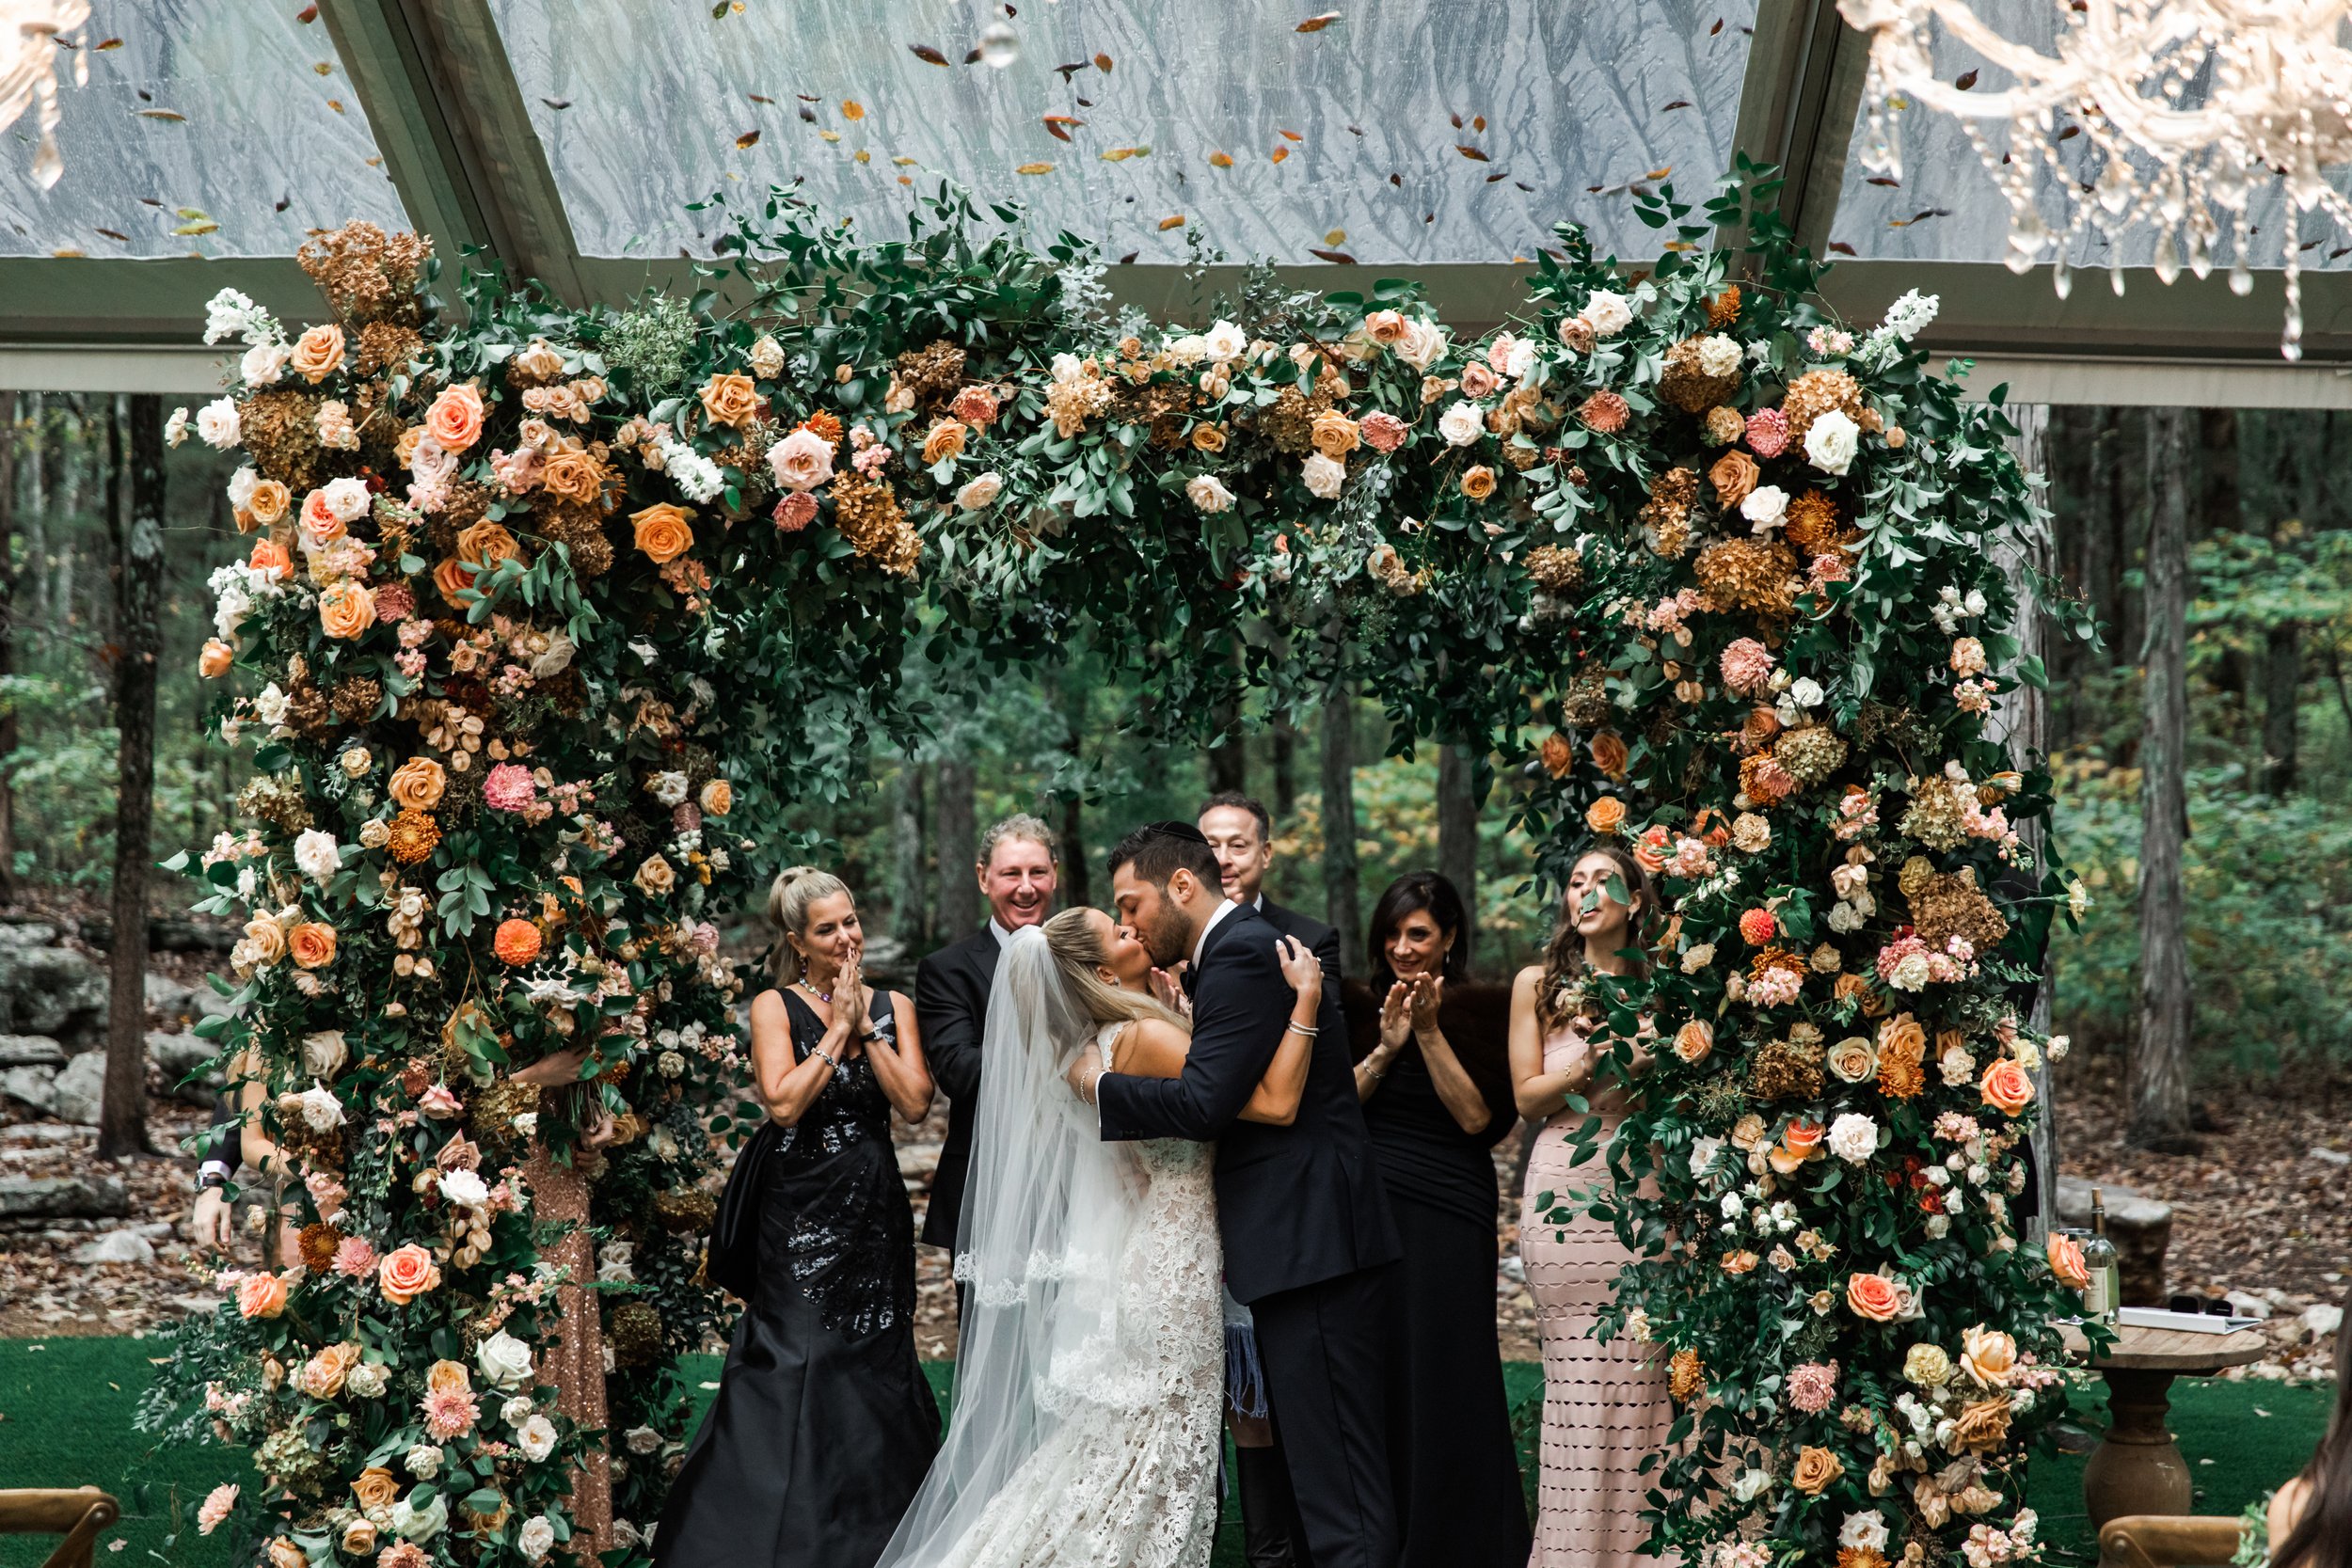 Eye-catching oversized chuppah overflowing with fall florals featuring dahlias, garden roses, rain tree pods, and fall greenery. Autumnal hues of terra cotta, dusty pink, copper, and yellow create this statement wedding piece. Designed by Rosemary an